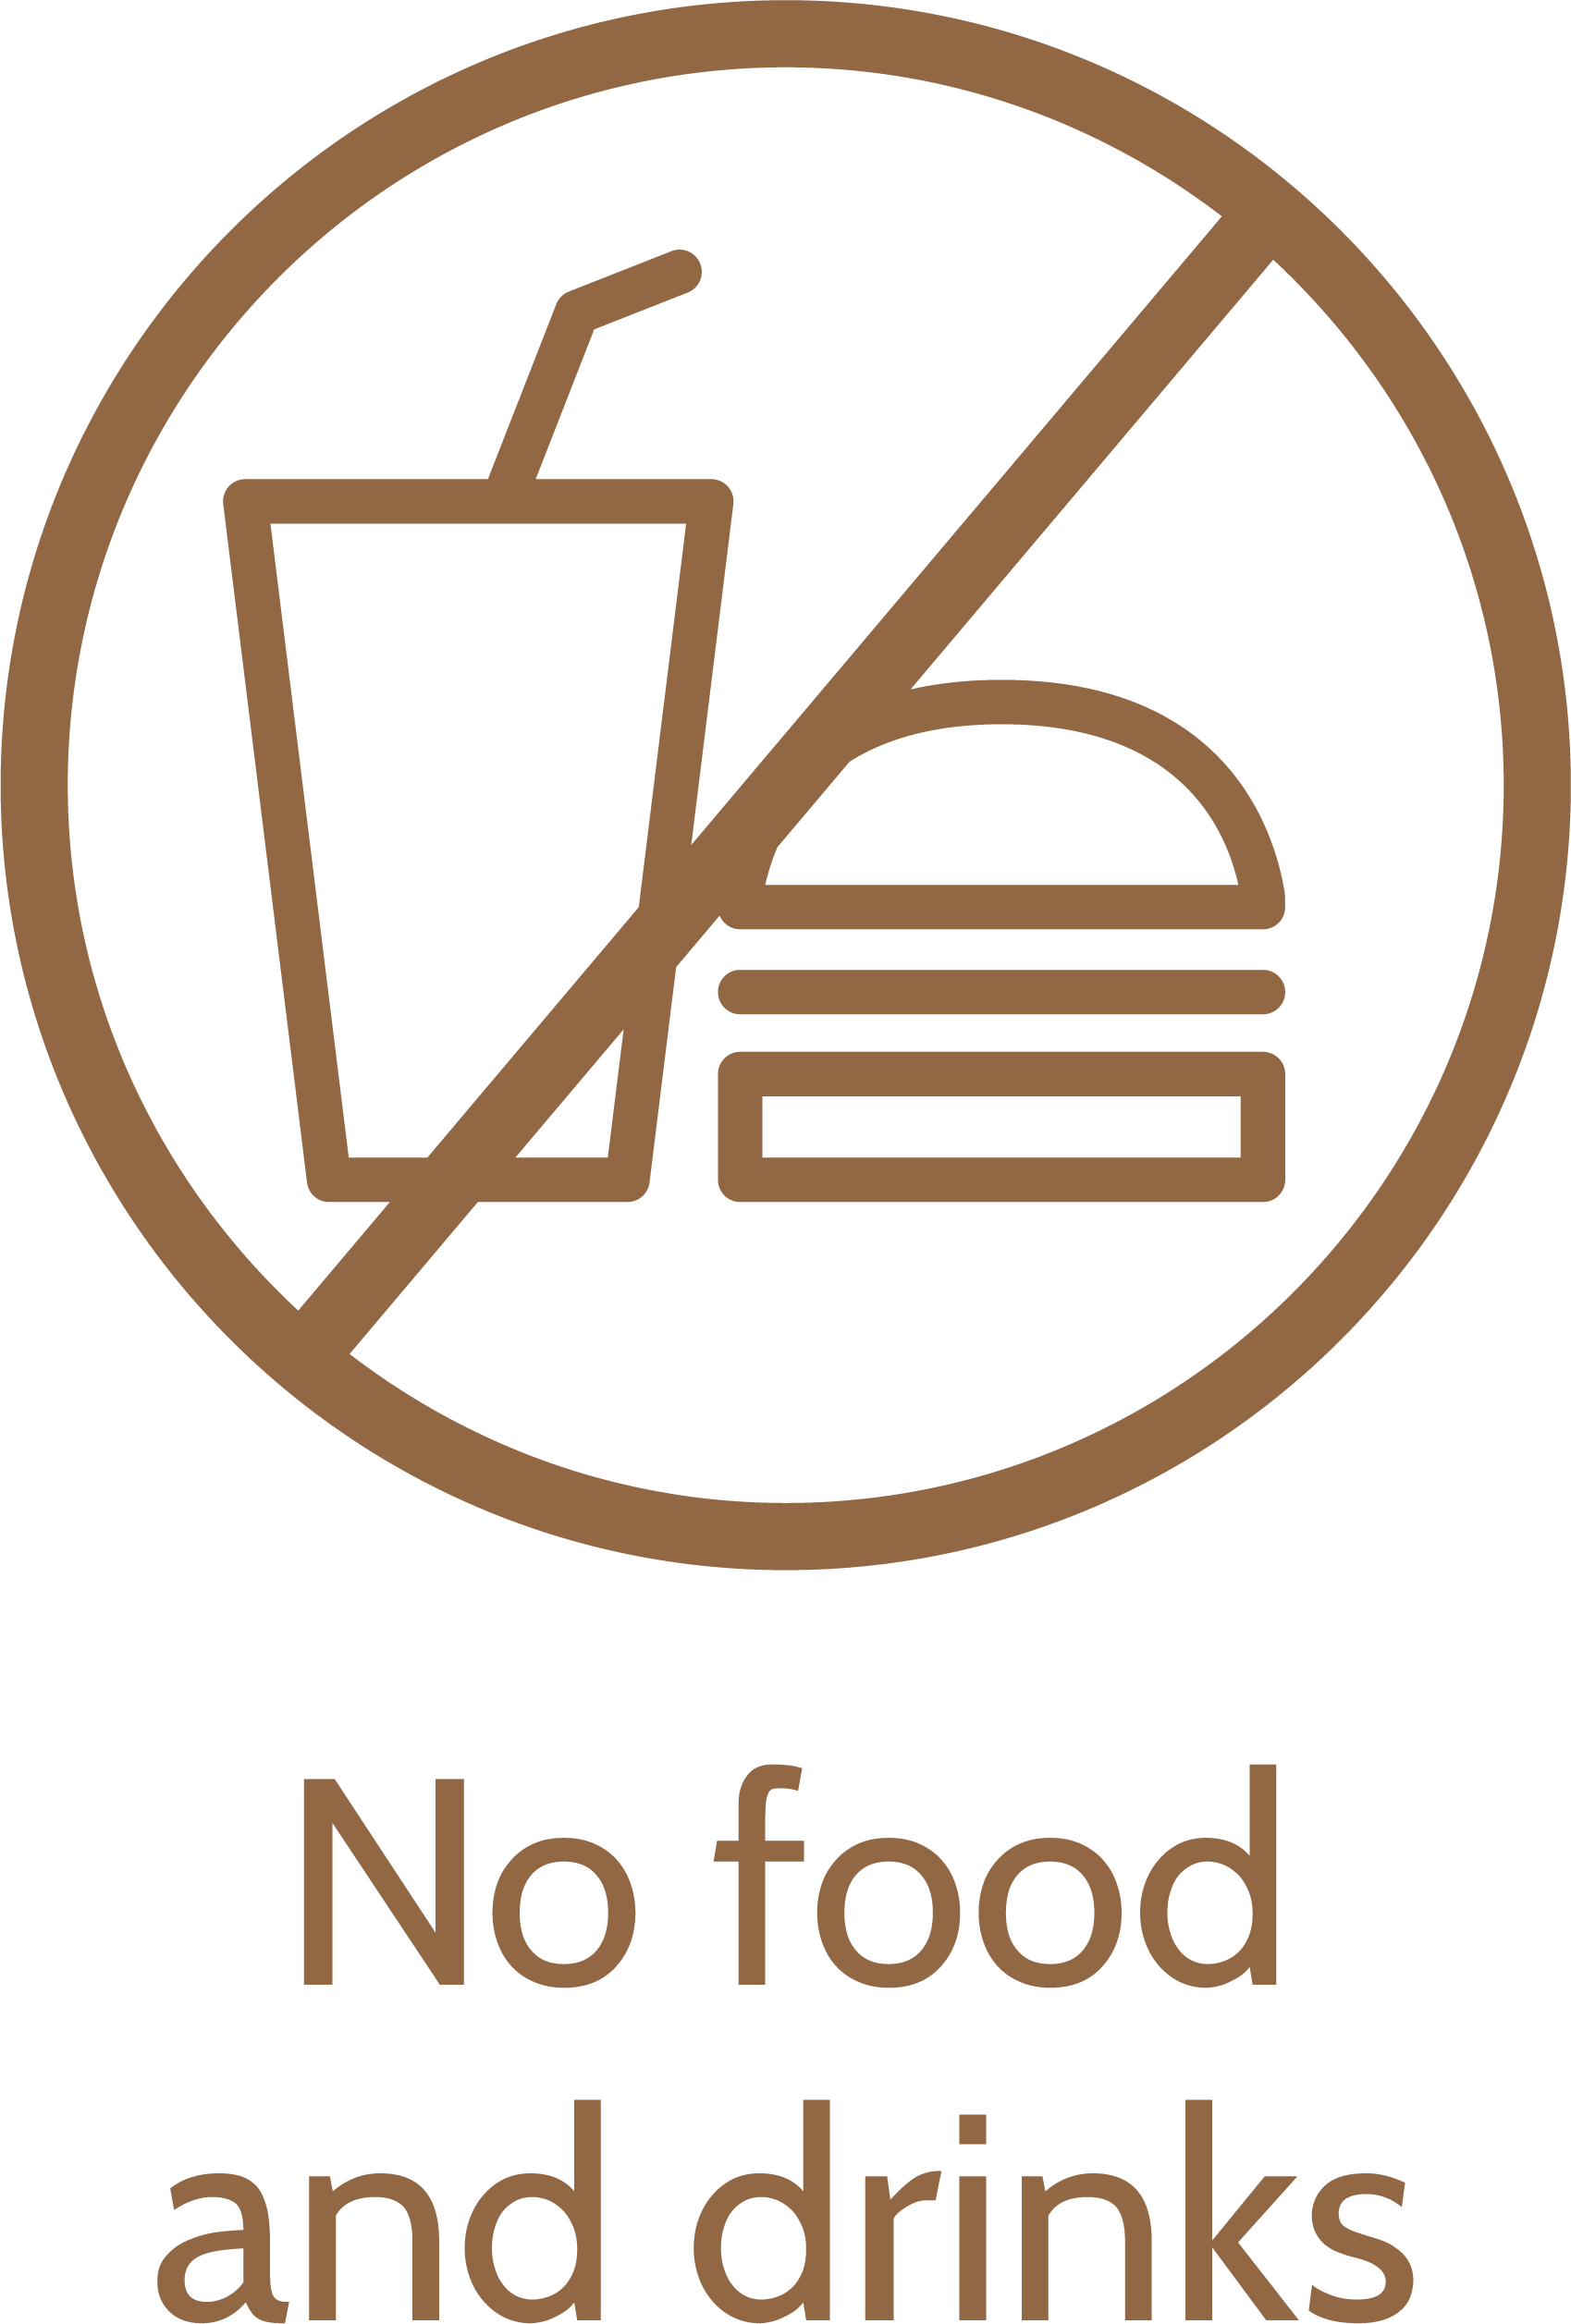 No food and drinks